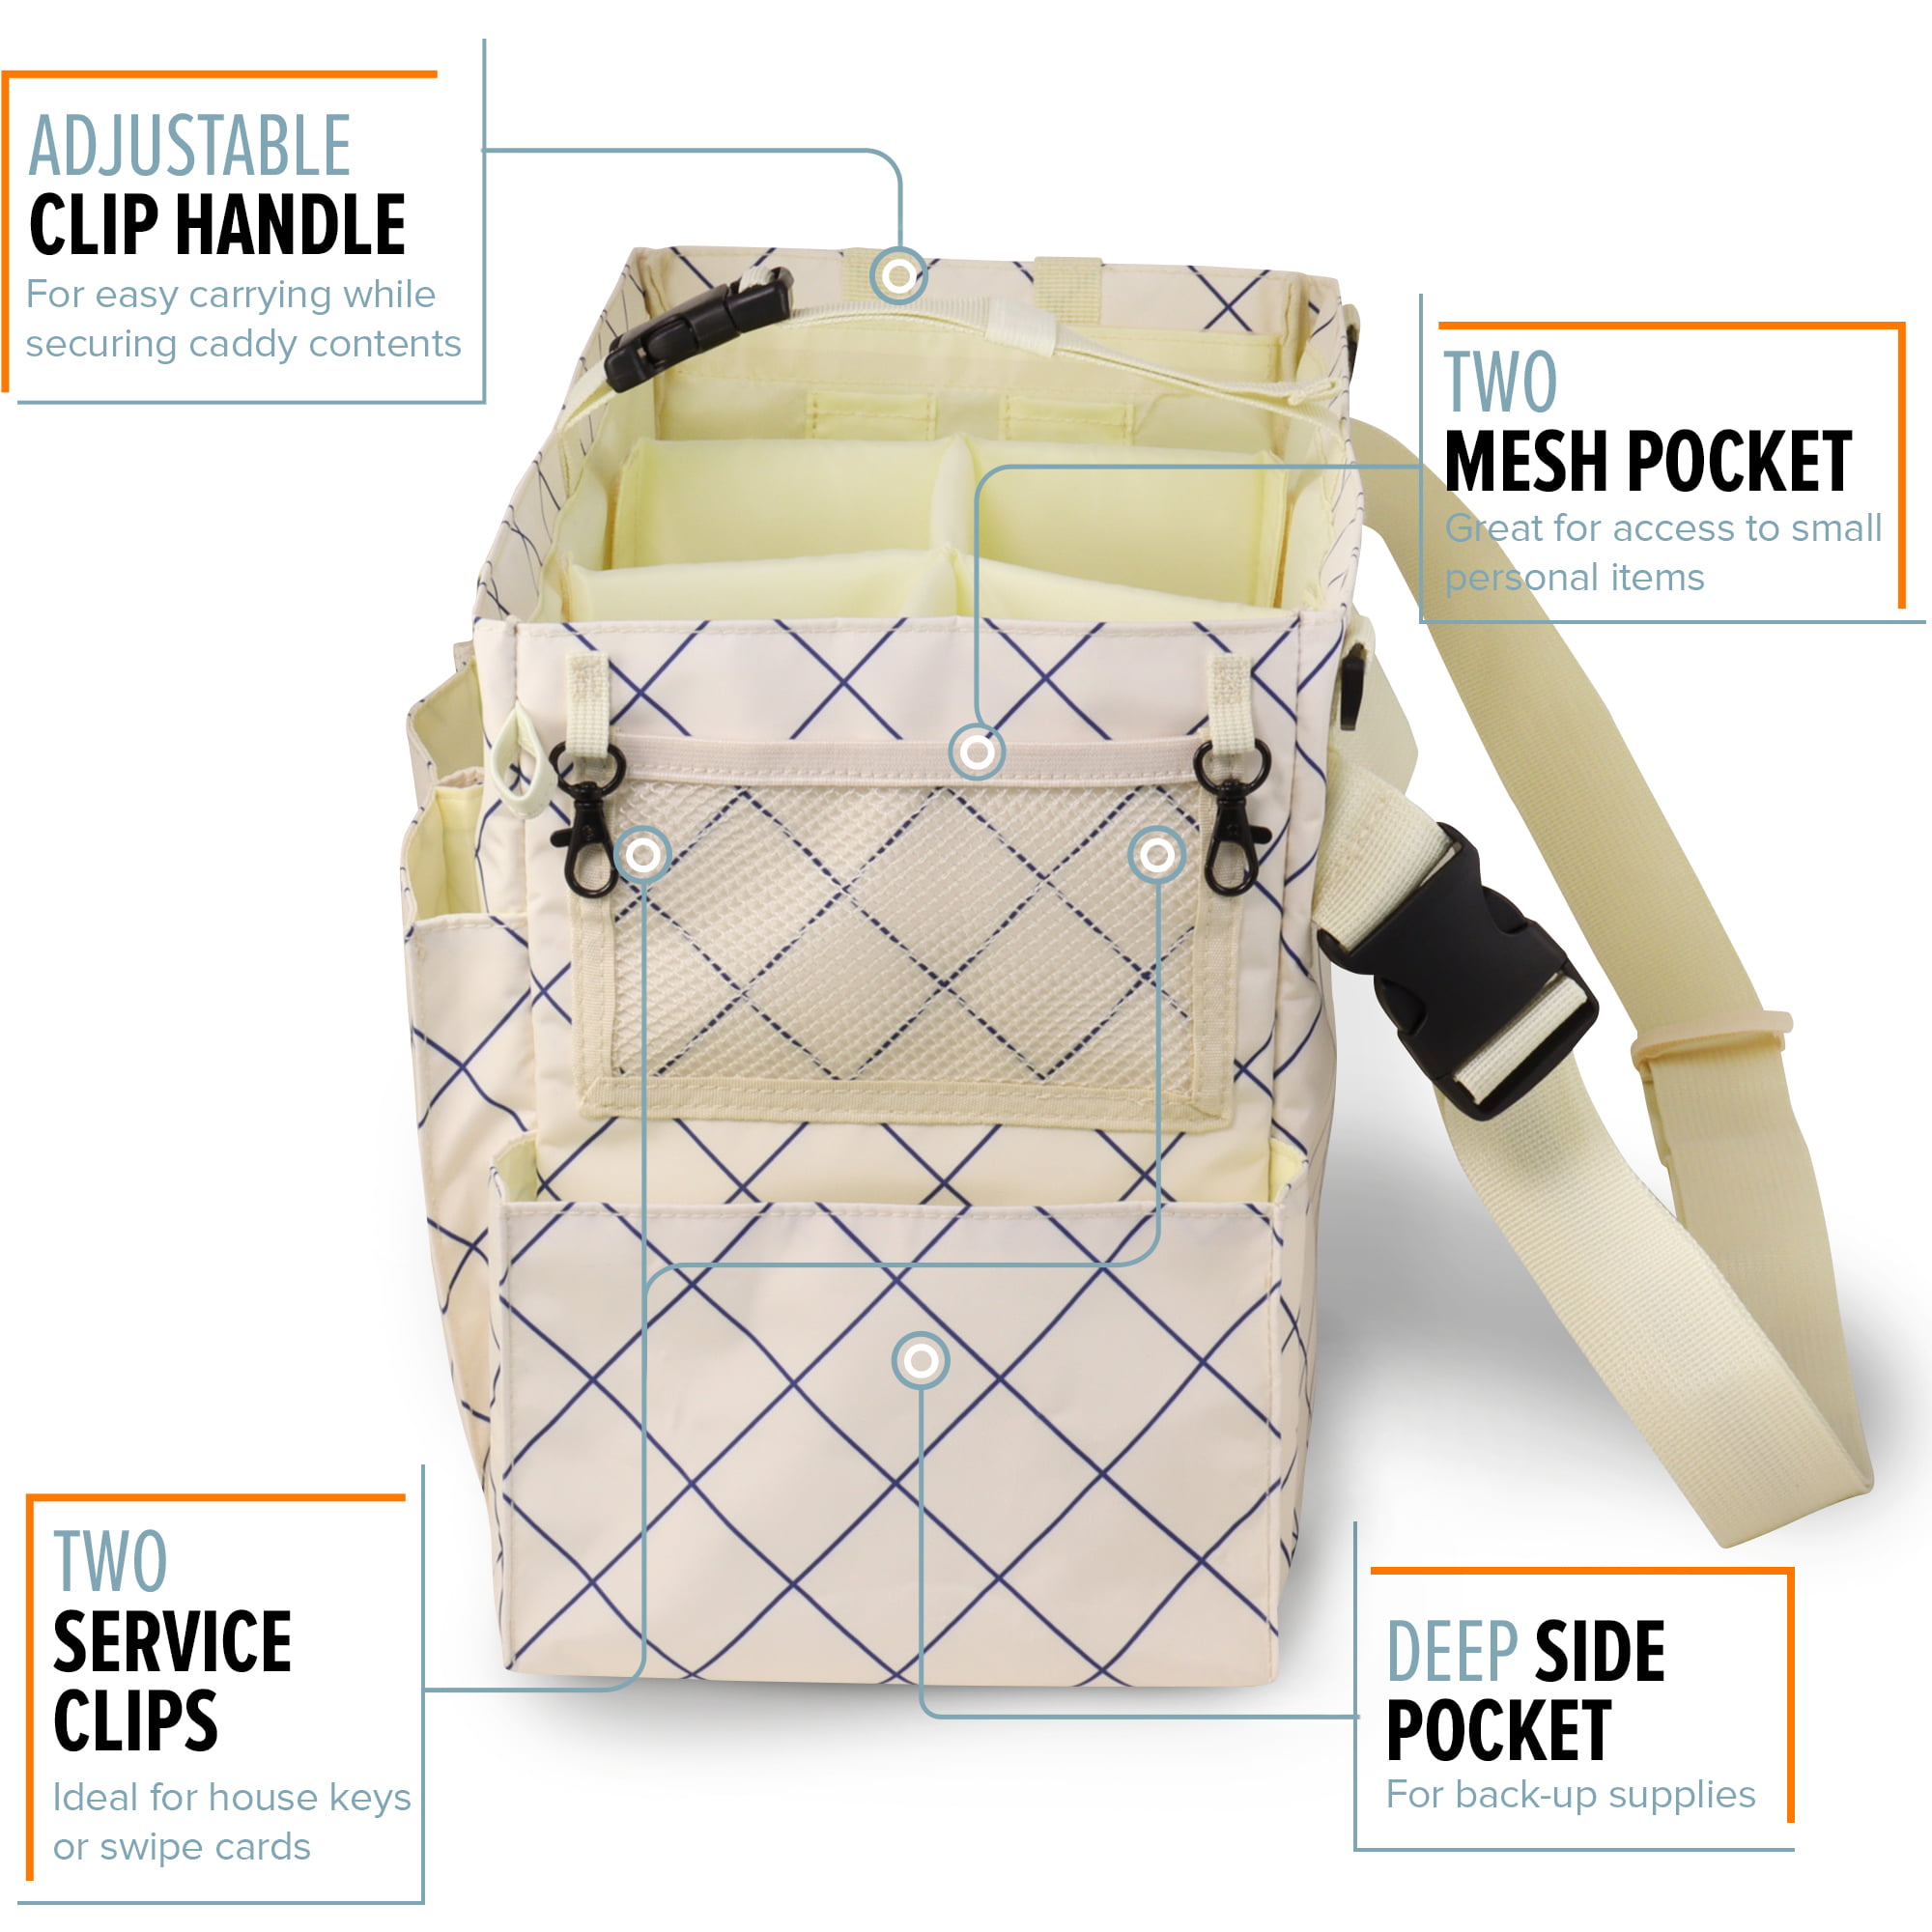 Wearable Cleaning Caddy: Green – FifthStart